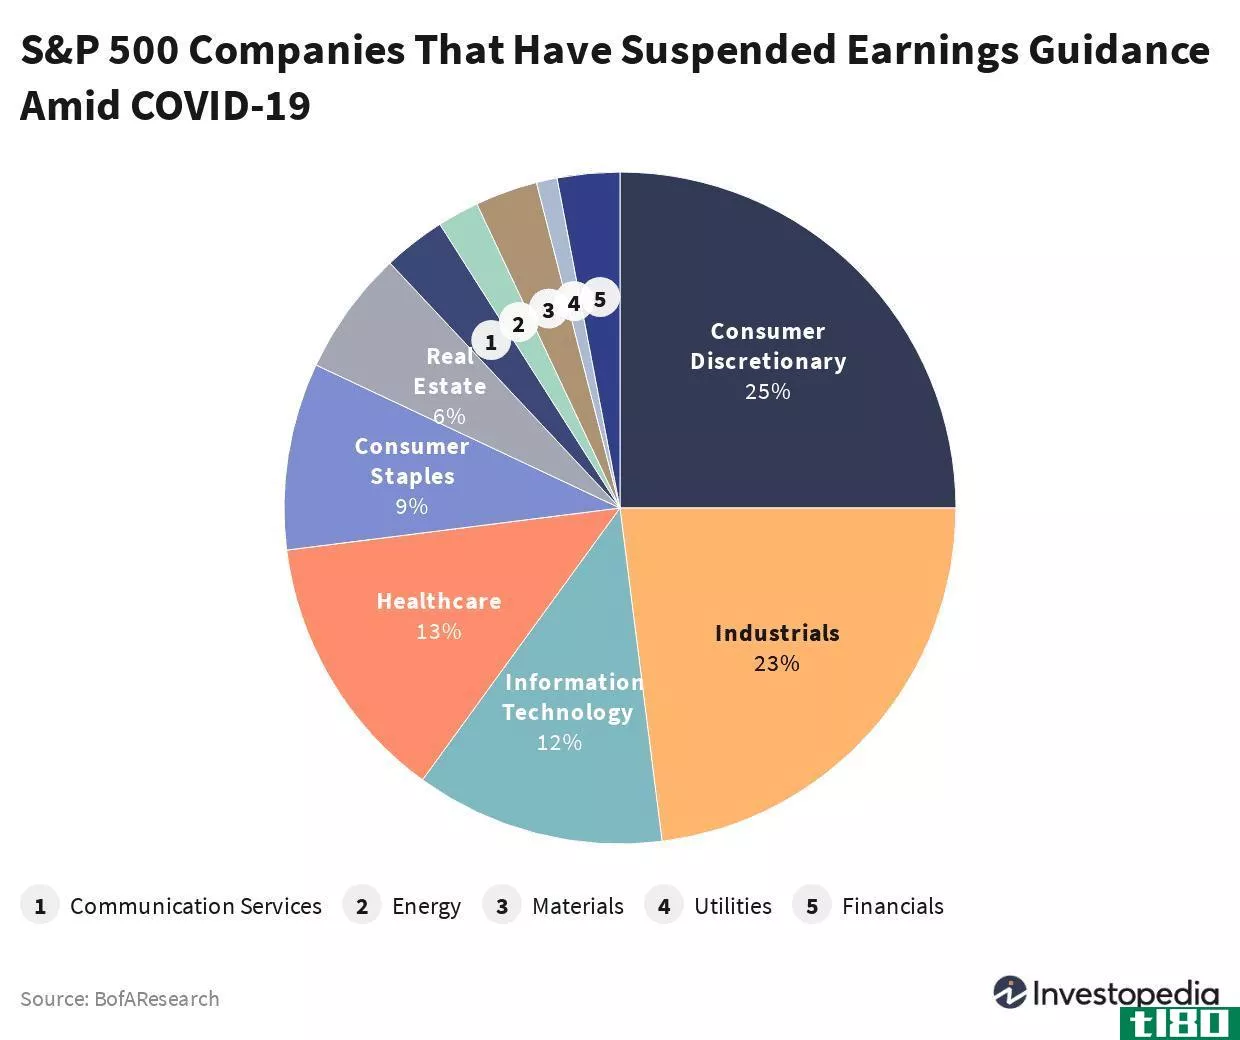 S&P 500 companies that have suspended earnings guidance amid COVID-19